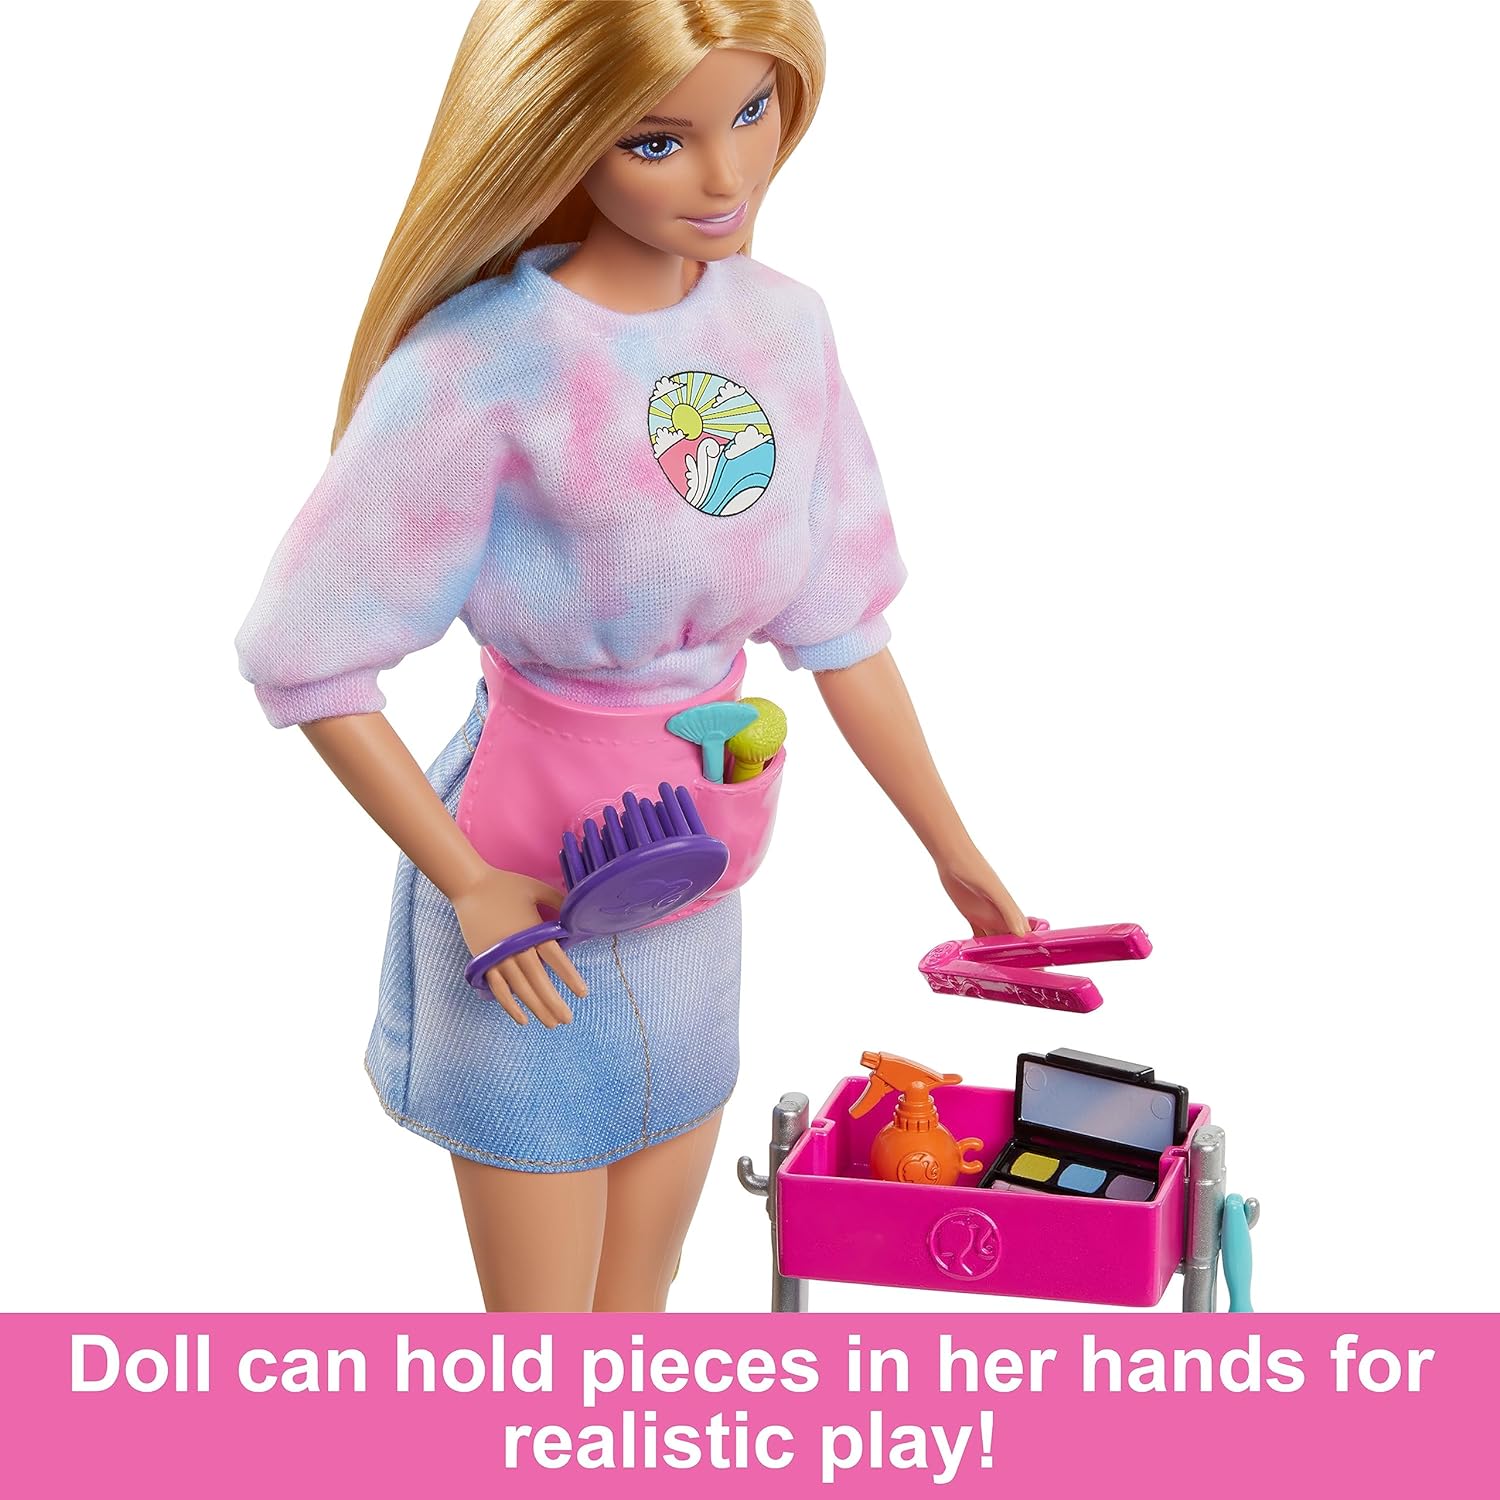 Barbie “Malibu” Stylist Doll & 14 Accessories Playset, Hair & Makeup Theme with Puppy & Styling Cart